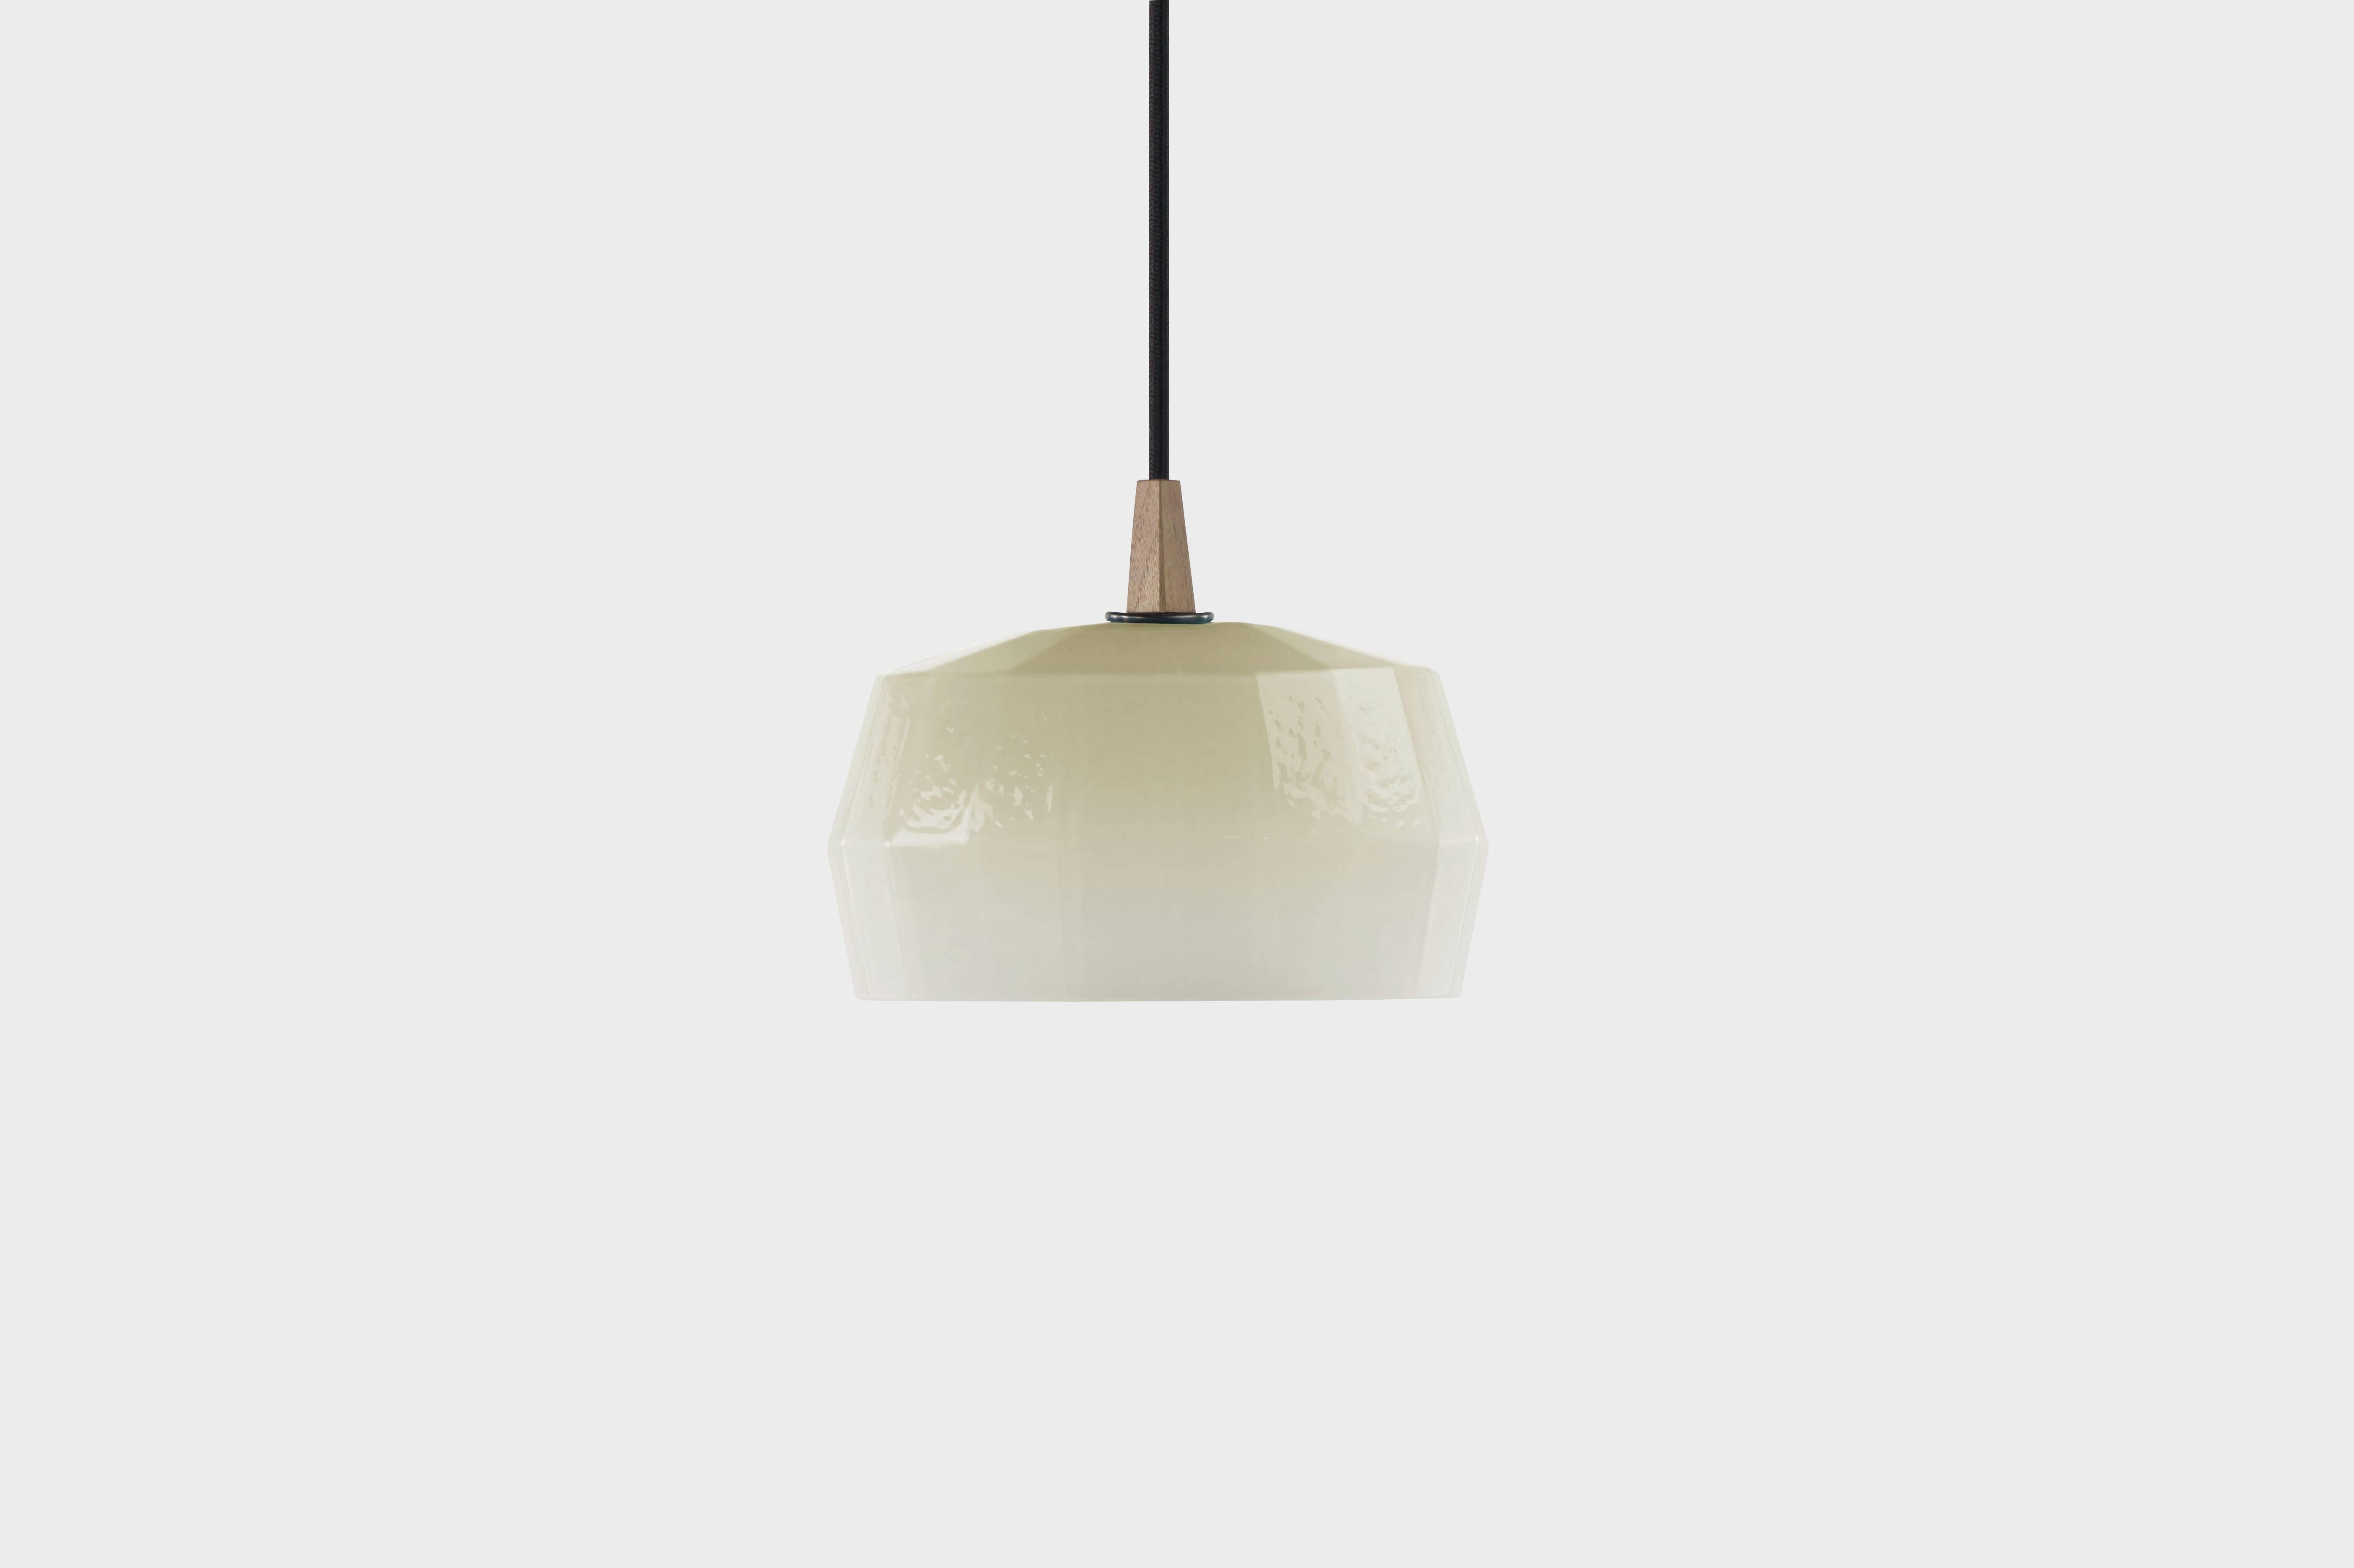 ZEP - 7.5” H x 9” L x 4.5” W available in 7 colors cream, caramel, lagoon, ruby, sky (shown), slate and tourmaline.

The Poly Pop pendant collection gives geometrically ridged architectural structure to common organic forms. Drawing inspiration